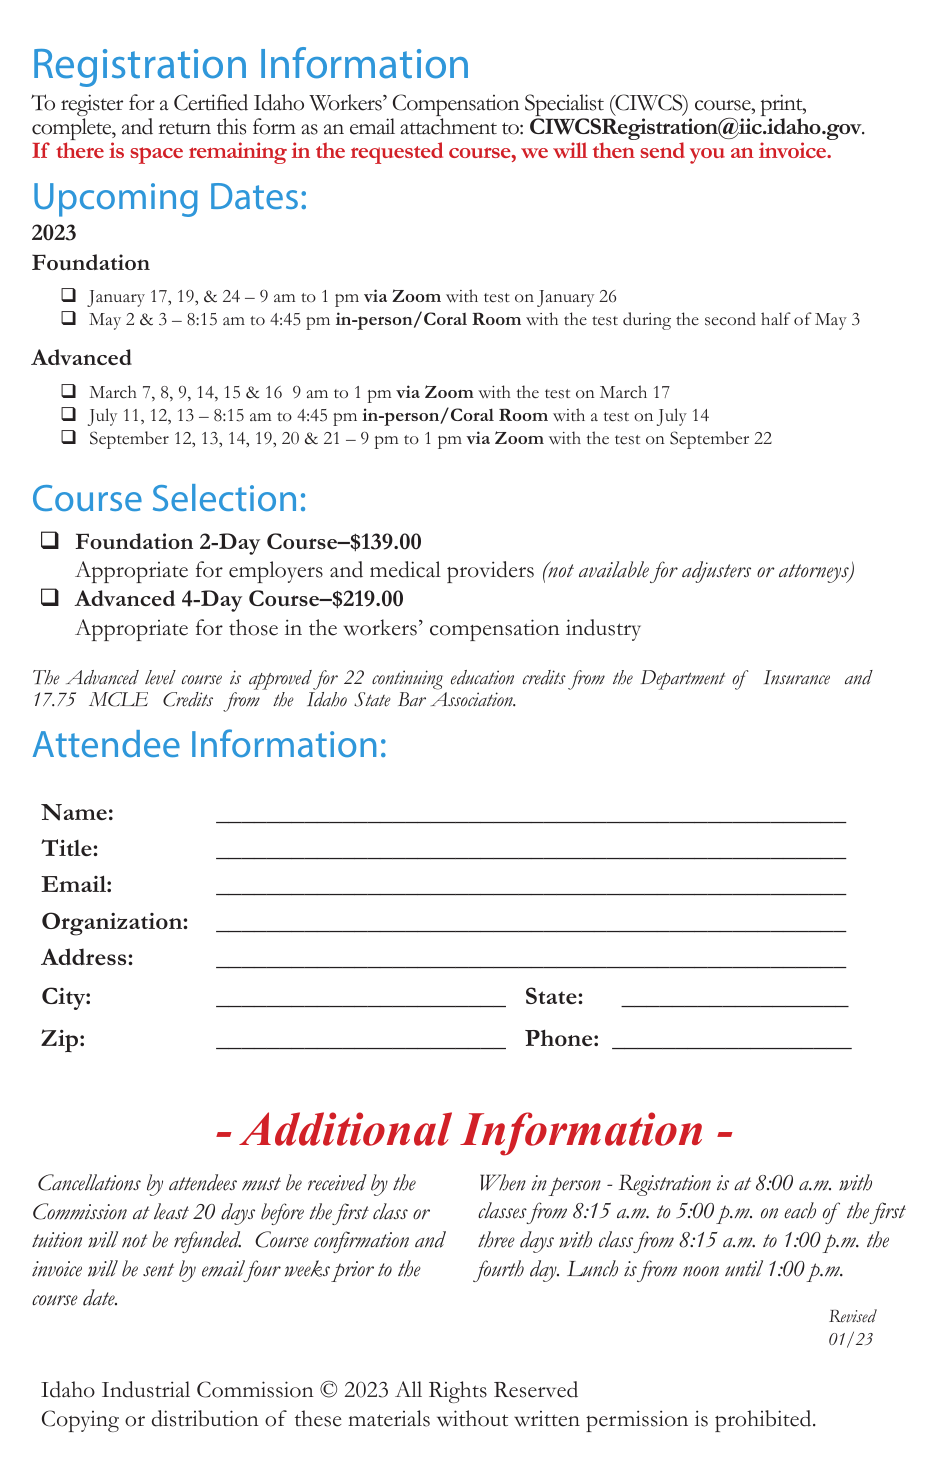 Certified Idaho Workers Compensation Specialist Course Registration Form - Idaho, Page 1